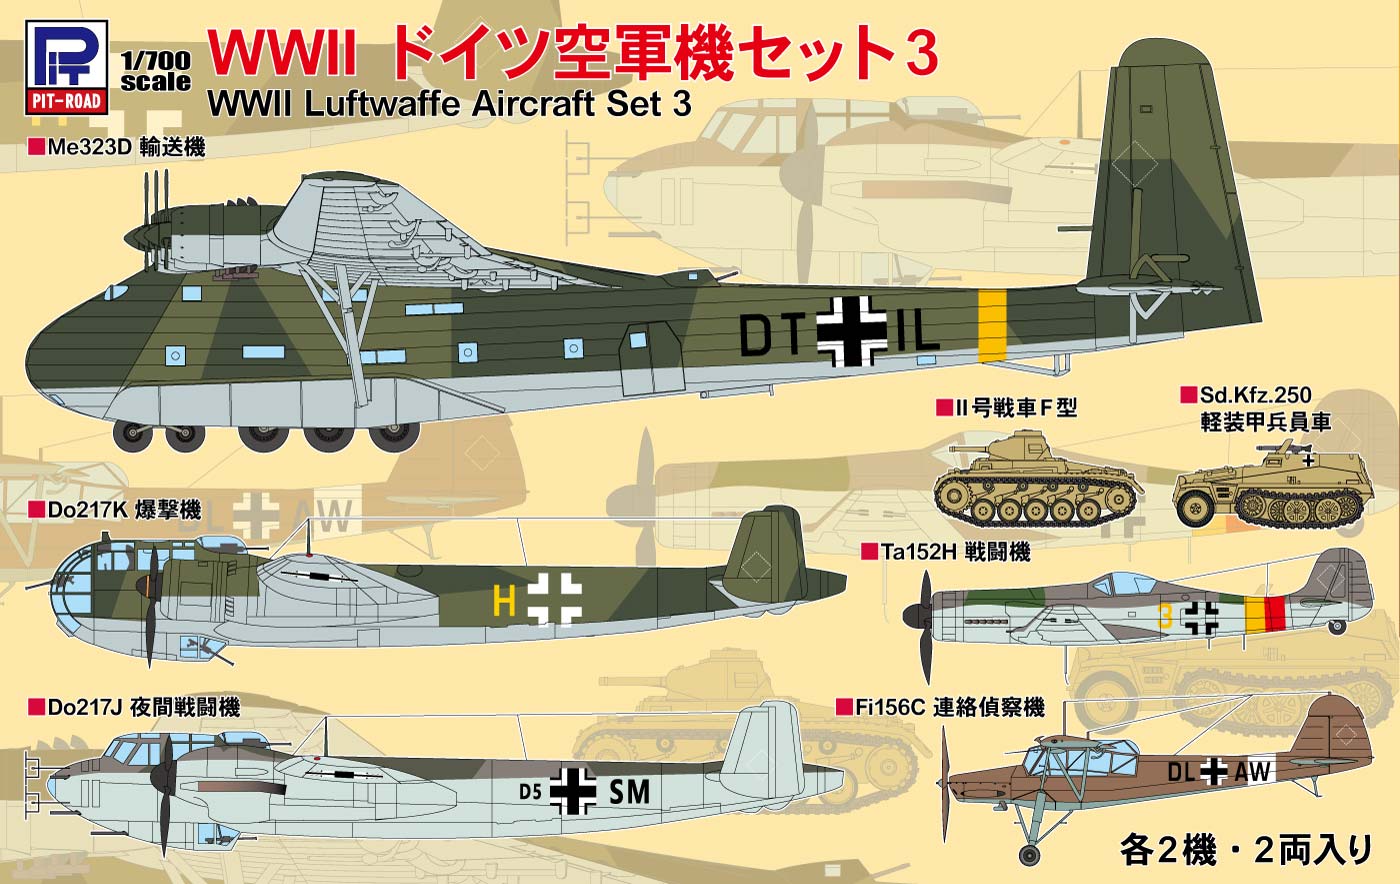 S60 1/700 WWIIドイツ空軍機セット3